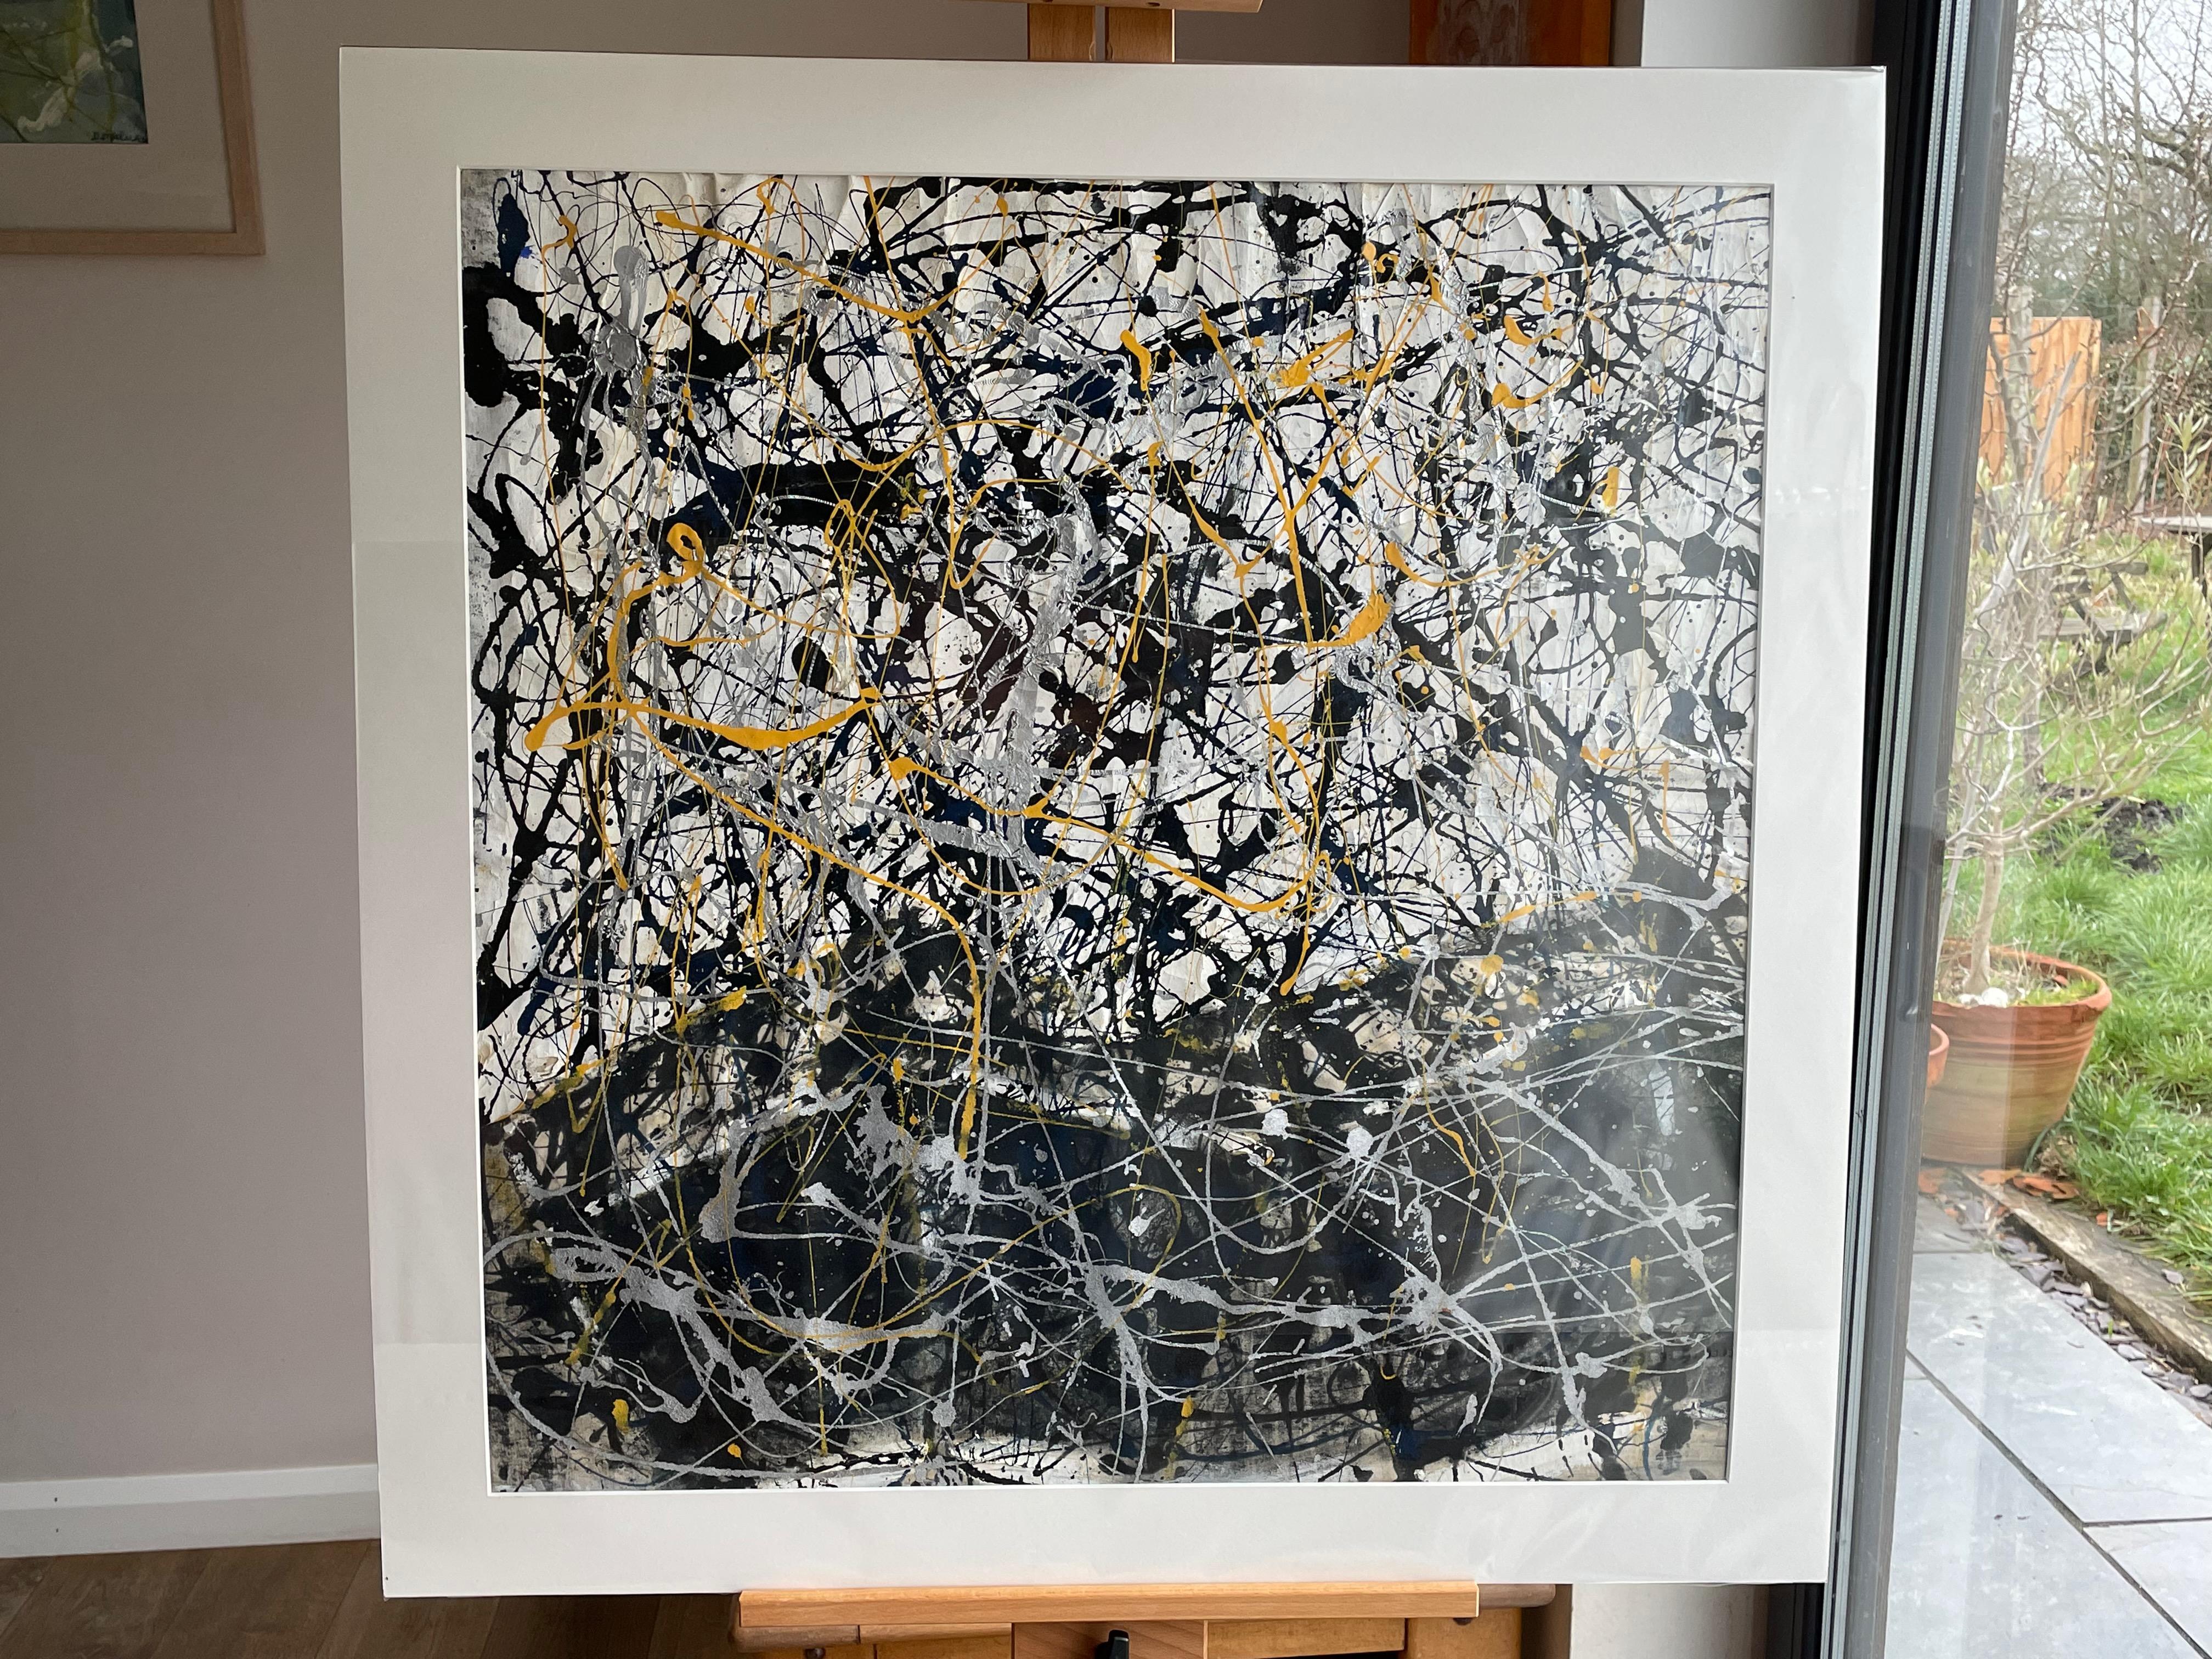 A large piece that uses colour in a particularly expressive way. This painting is warm and fluid contrasting monotones with splatters of yellow pigment.

Splatter painting on canvas.

Unsigned and mounted on card

Mounted 34